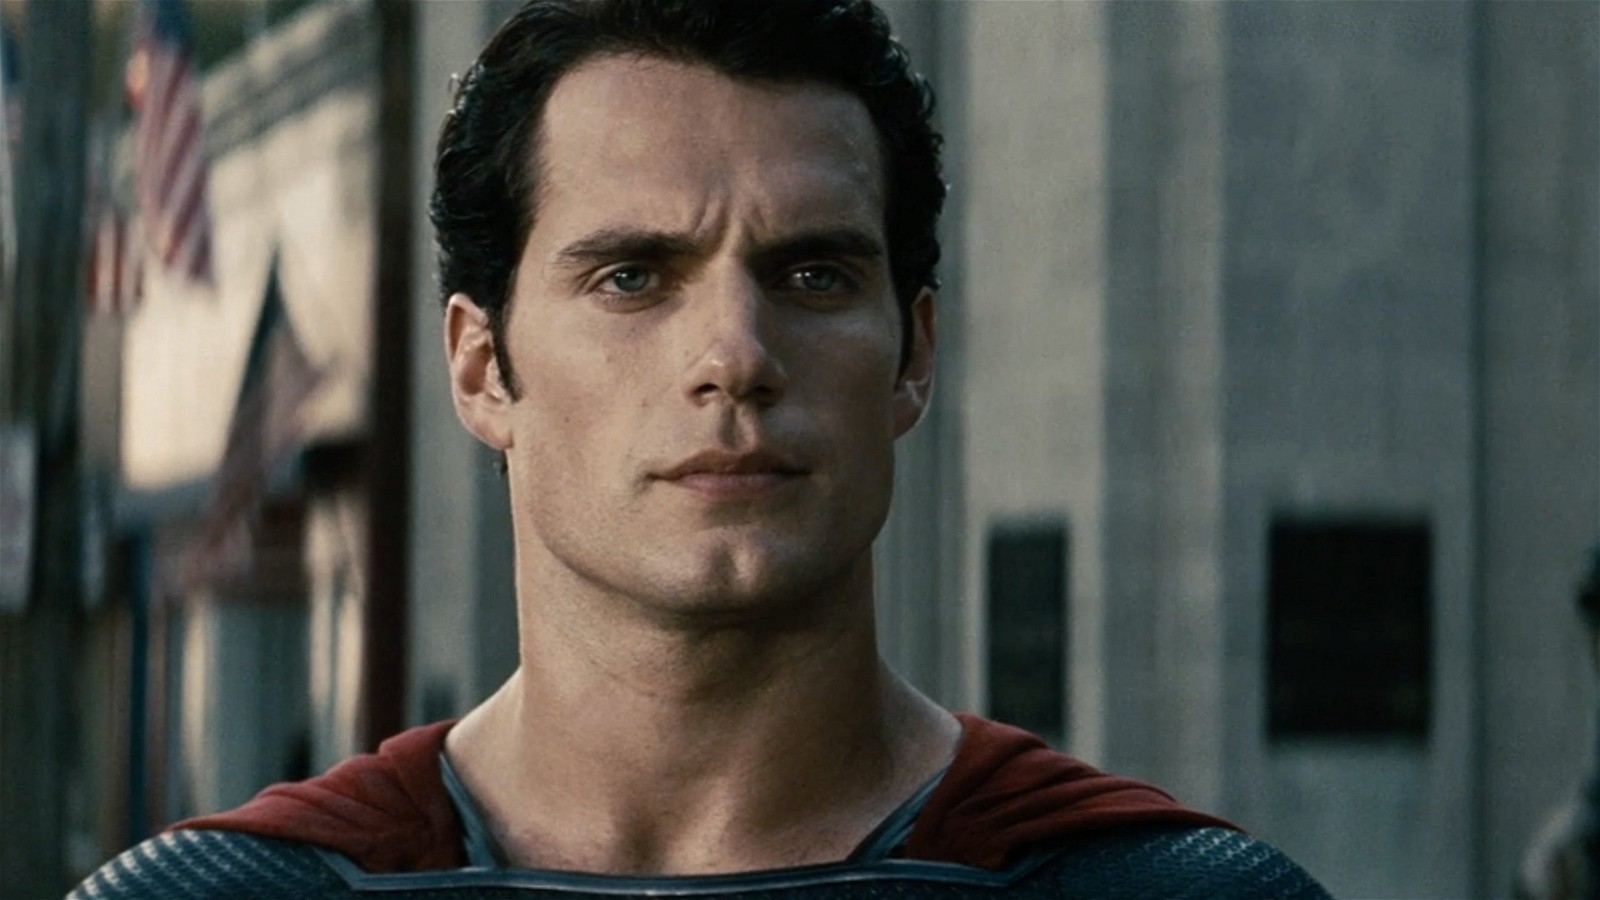 Netflix is now removing many DC films including Man of Steel very soon